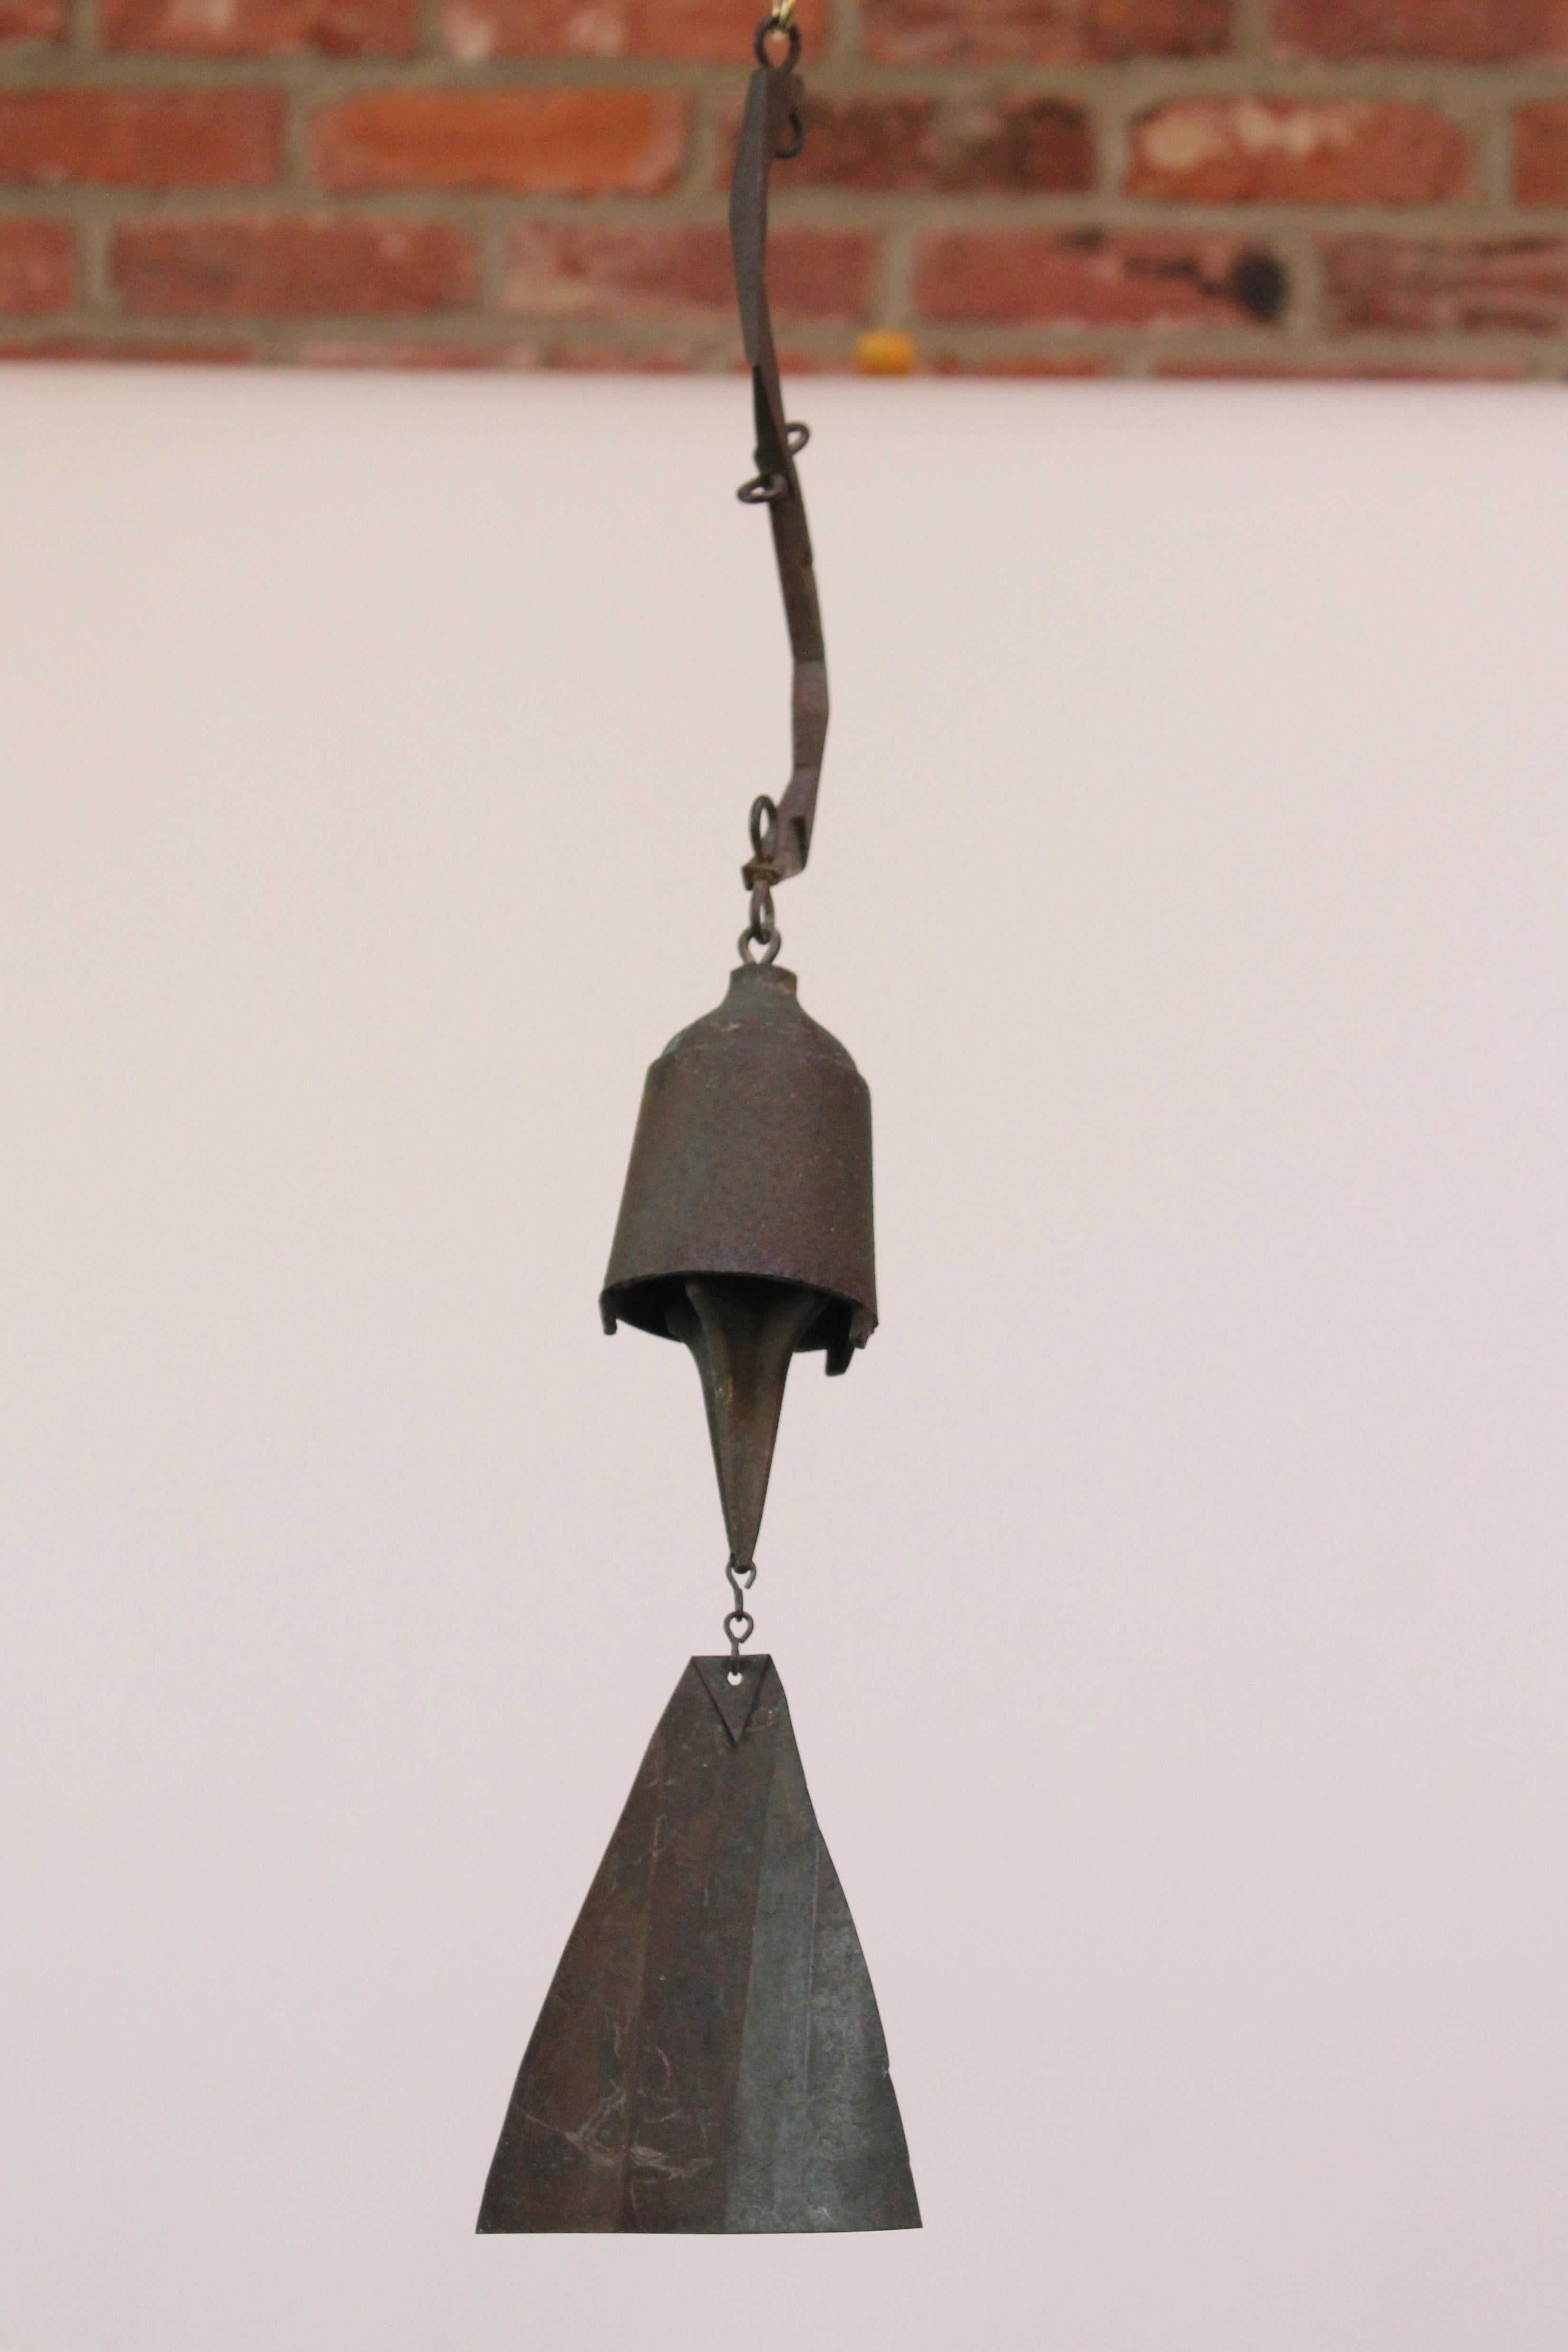 Vintage wind chime / bell designed by architect, Paolo Soleri for Arconsanti (the city he designed and built in Arizona in 1970).
Bronze cast elements with verdigris and heavily oxidized patina throughout from natural age and environmental